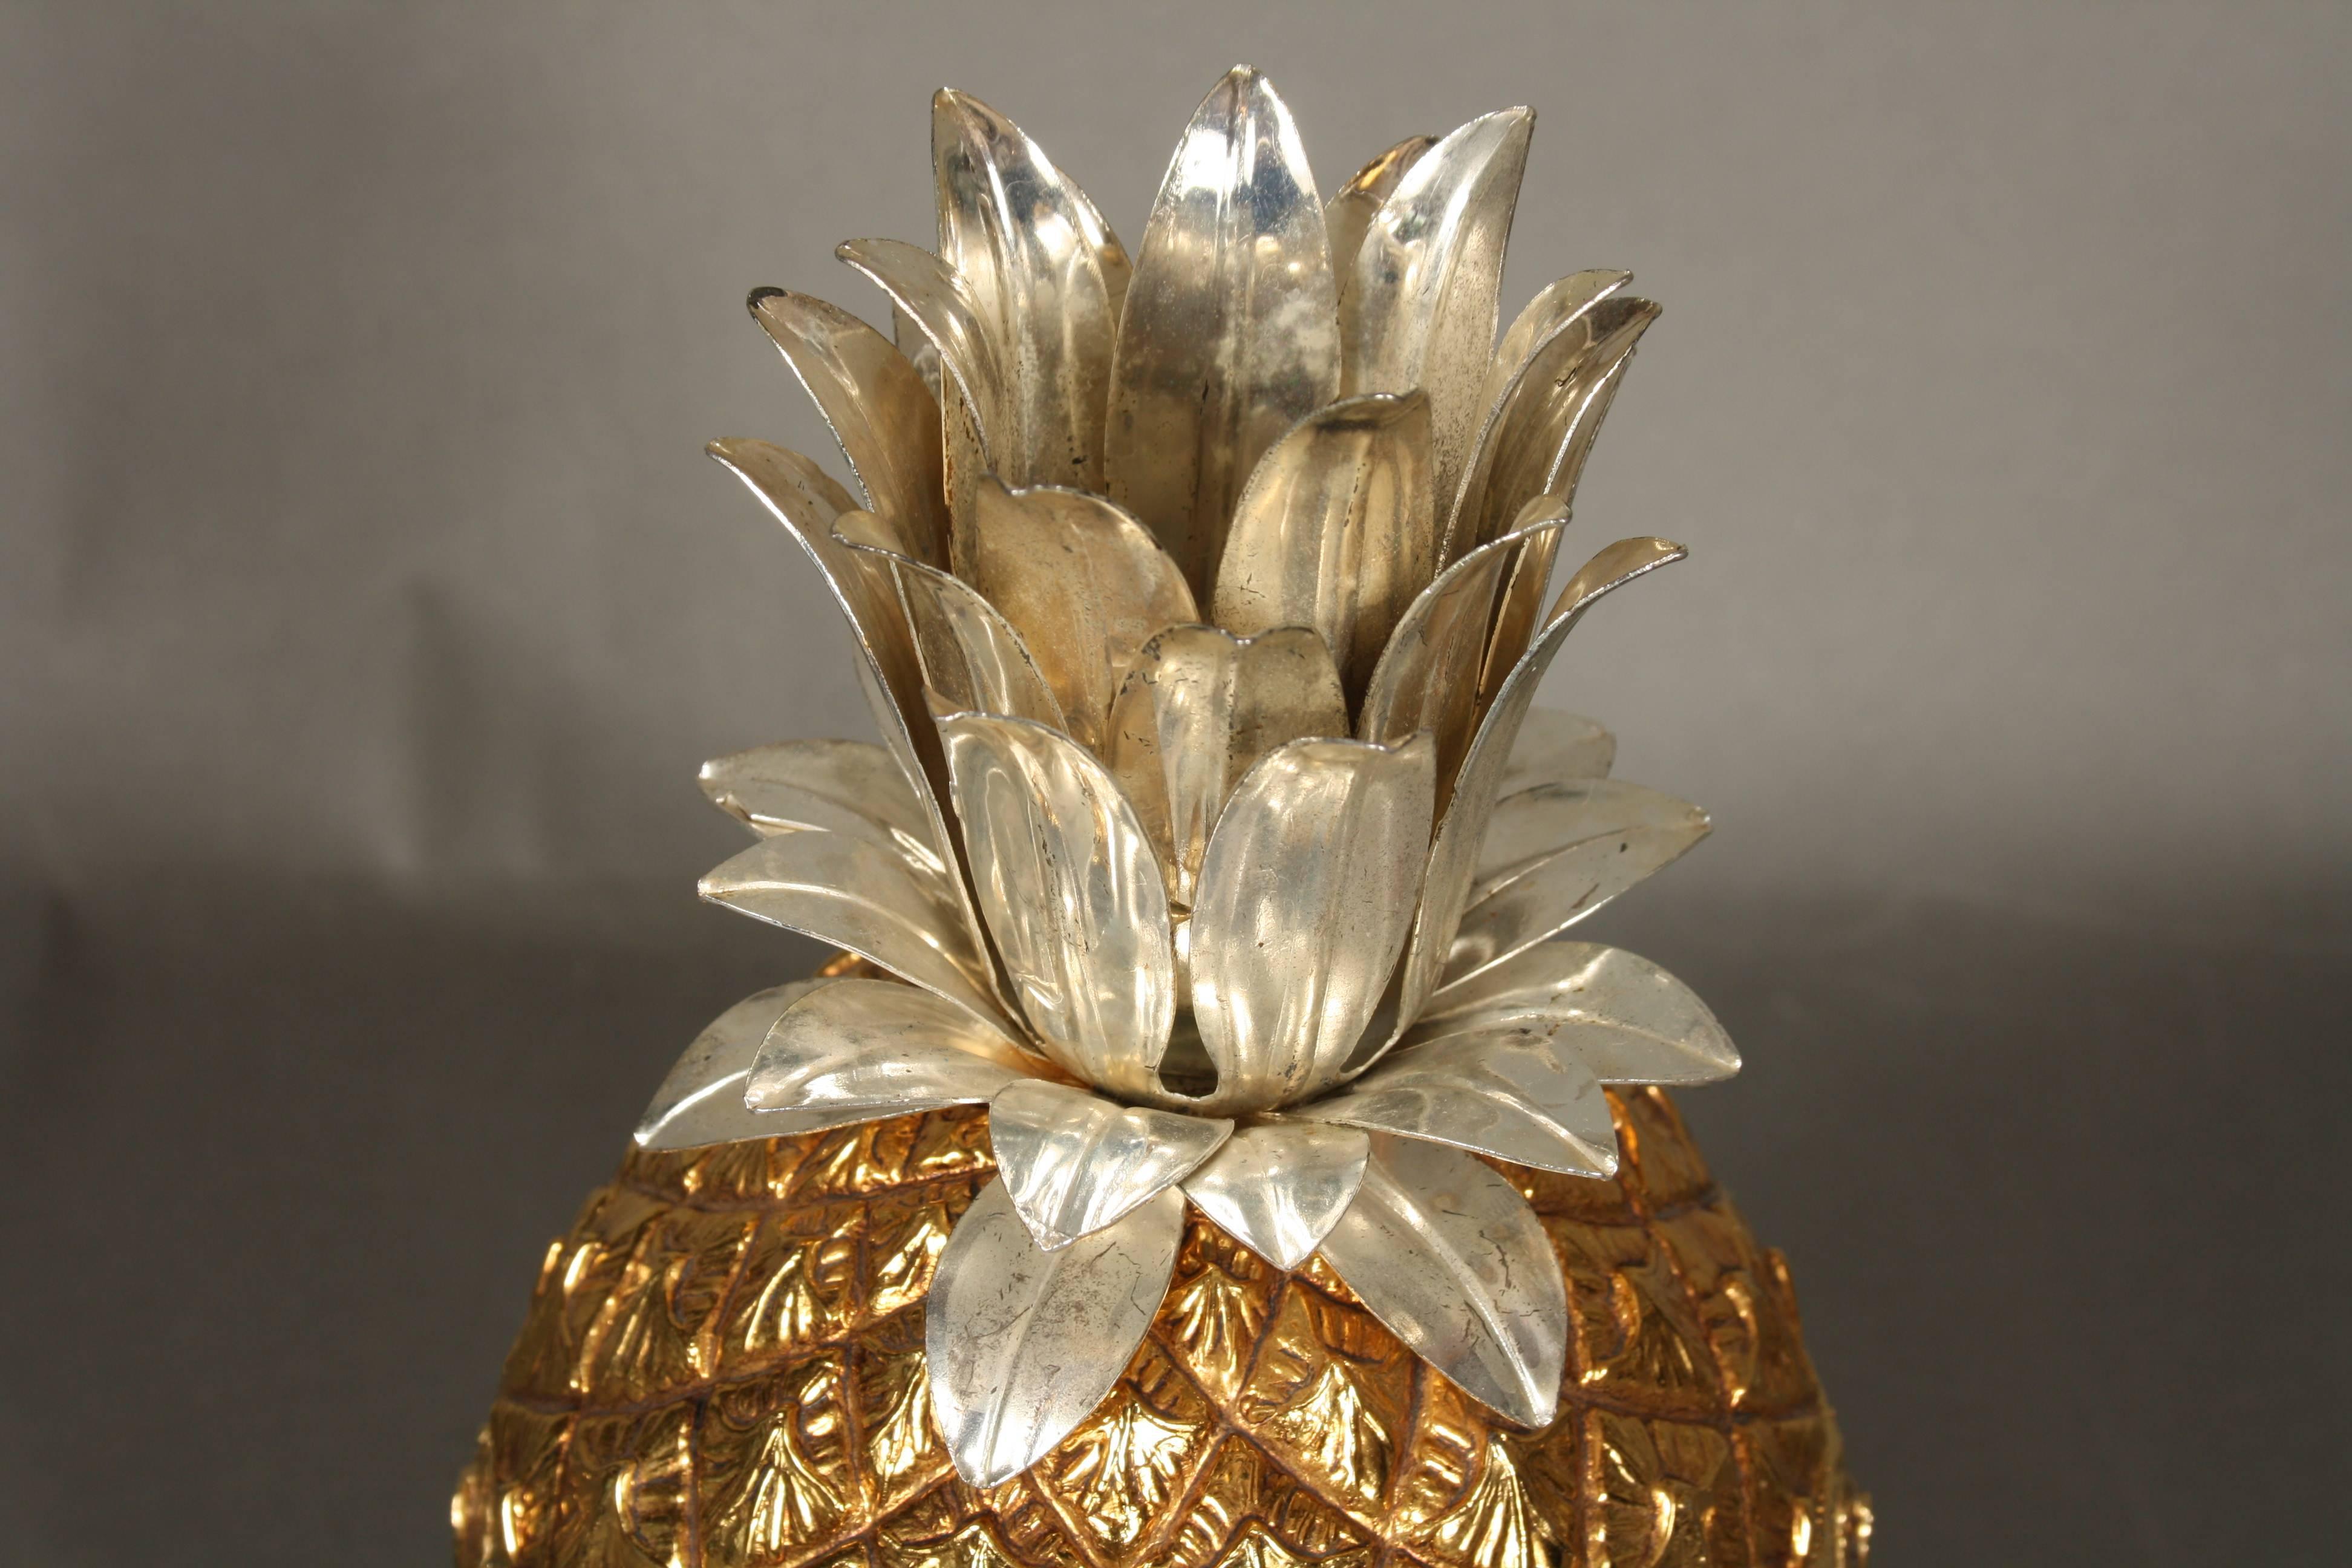 Metal Italian Gilt and Silver Colored Mauro Manetti Pineapple Ice Bucket, 1960s For Sale